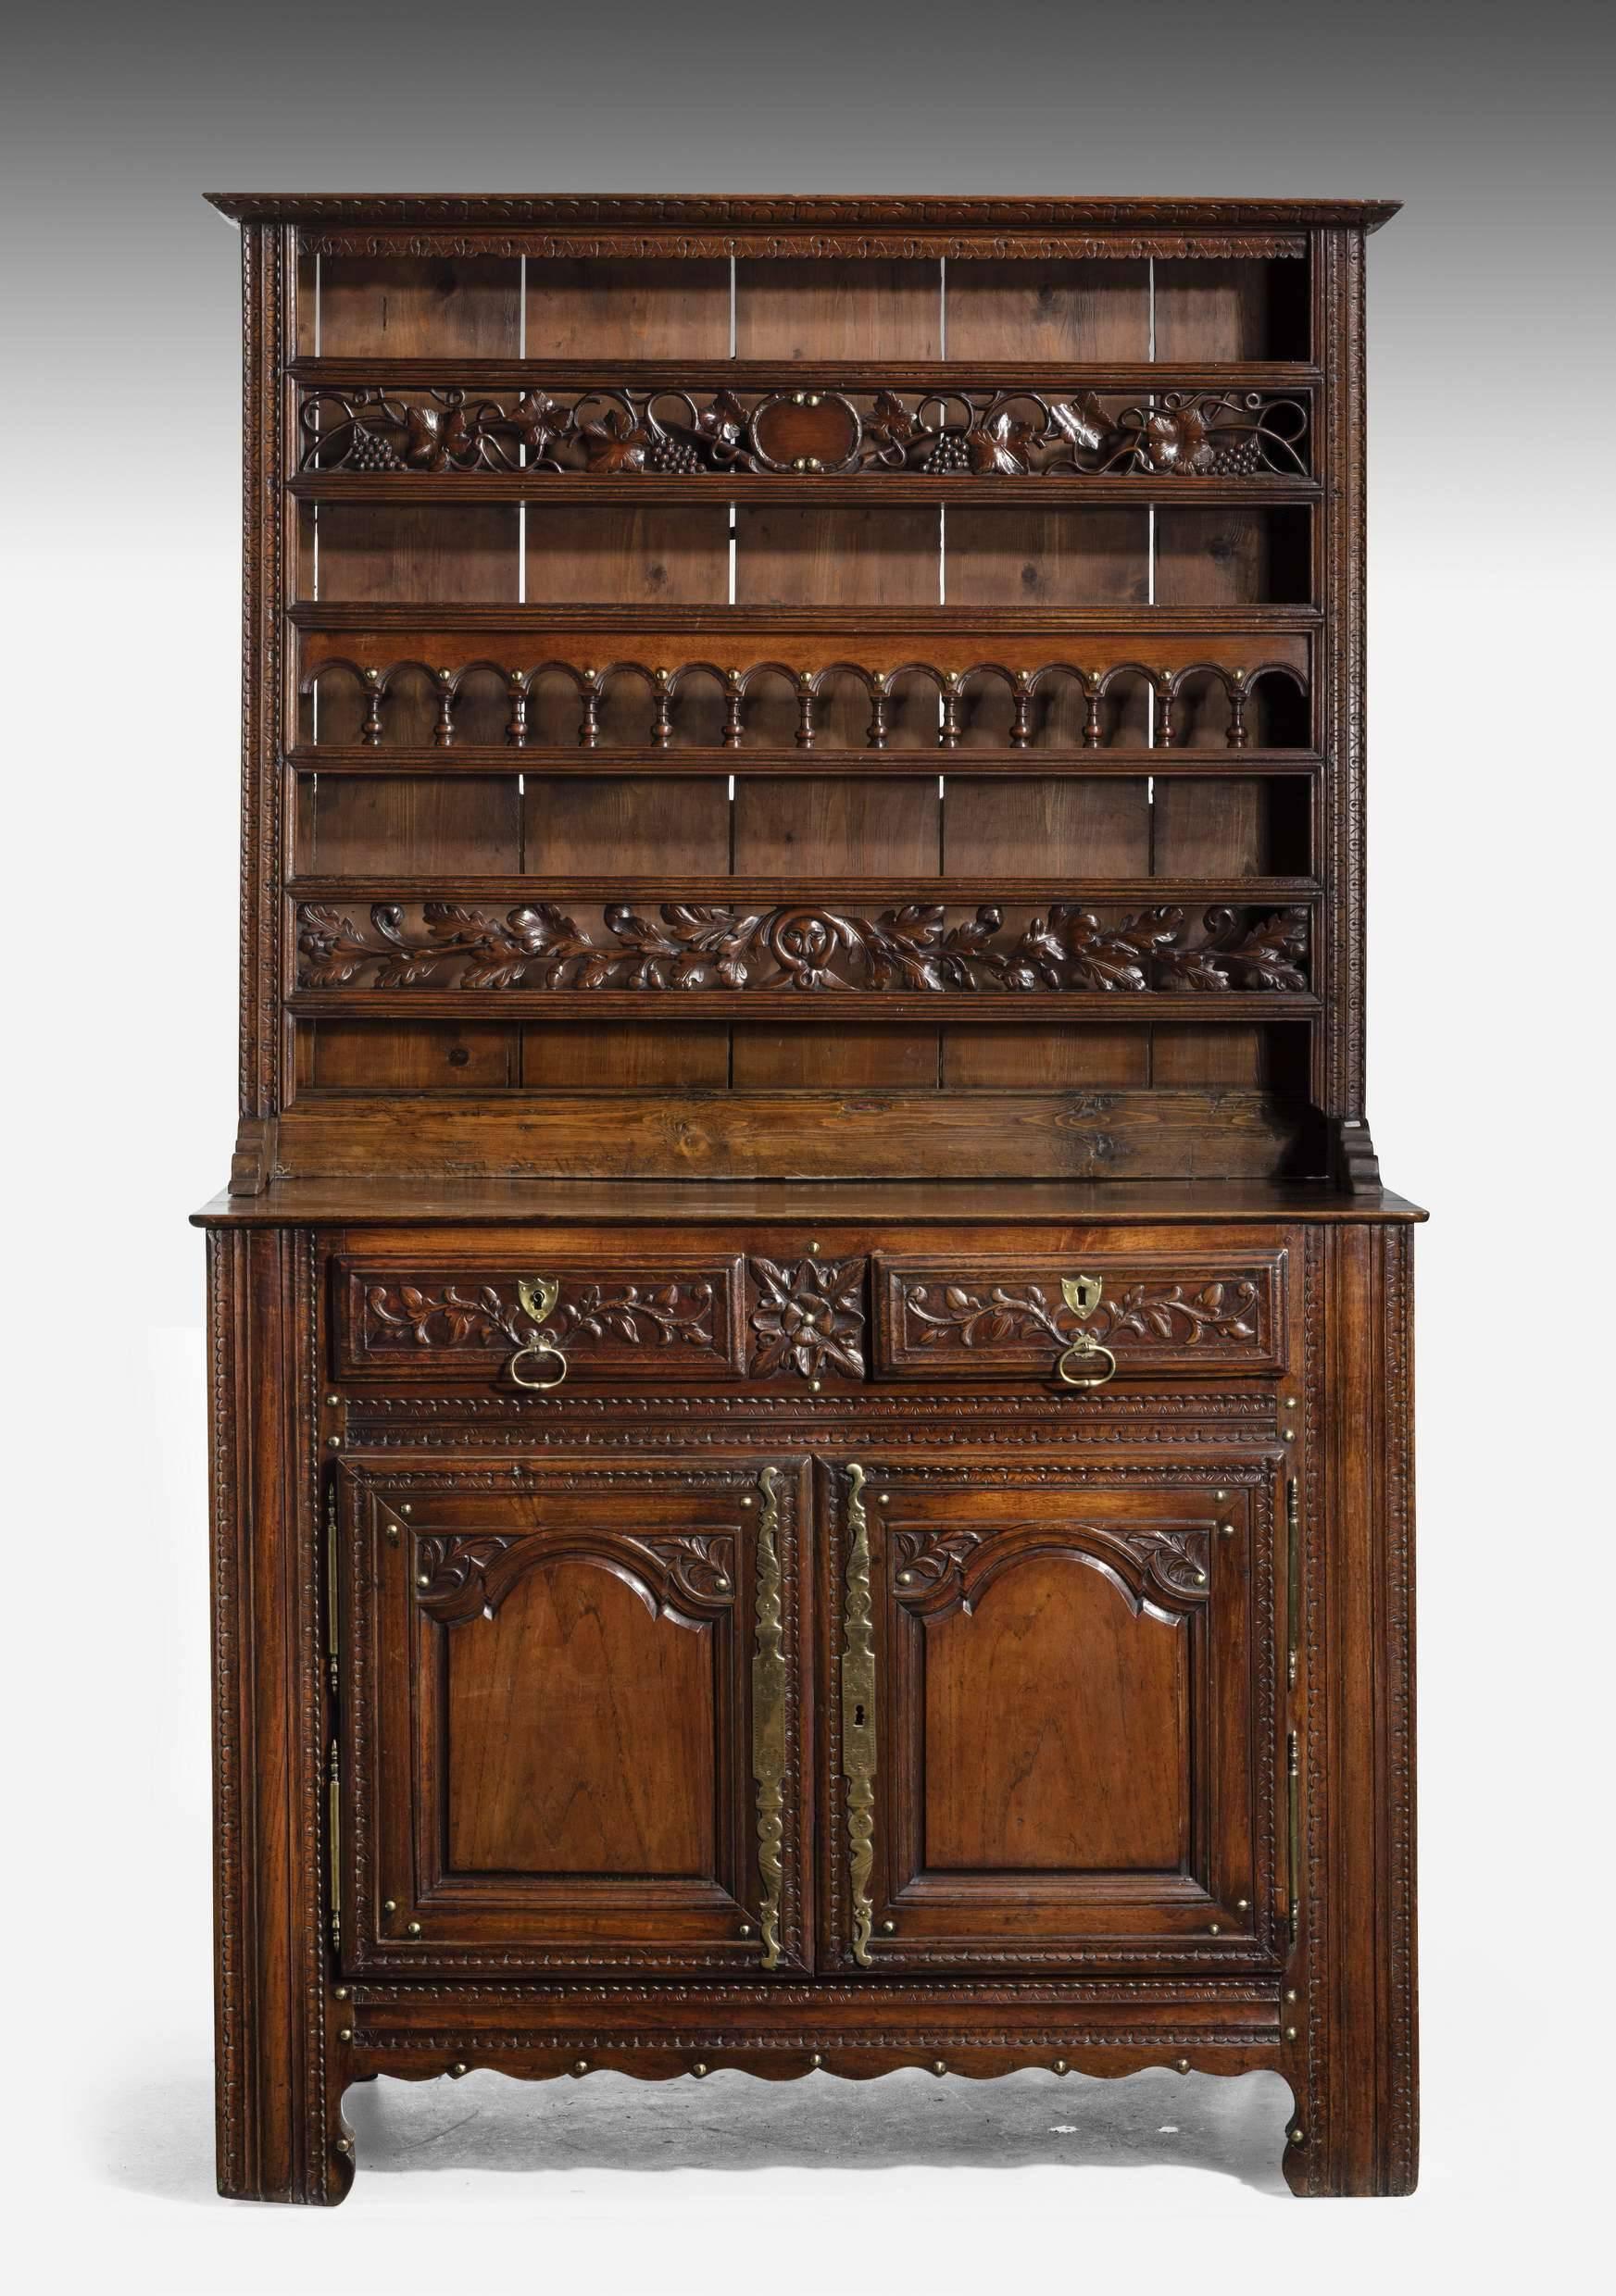 A splendid quality mahogany French chestnut dresser and rack of small proportions. The front pieces carved with scrolling leaf work. The top section with arcading oak leaves and vine and grapes. Wonderful condition.